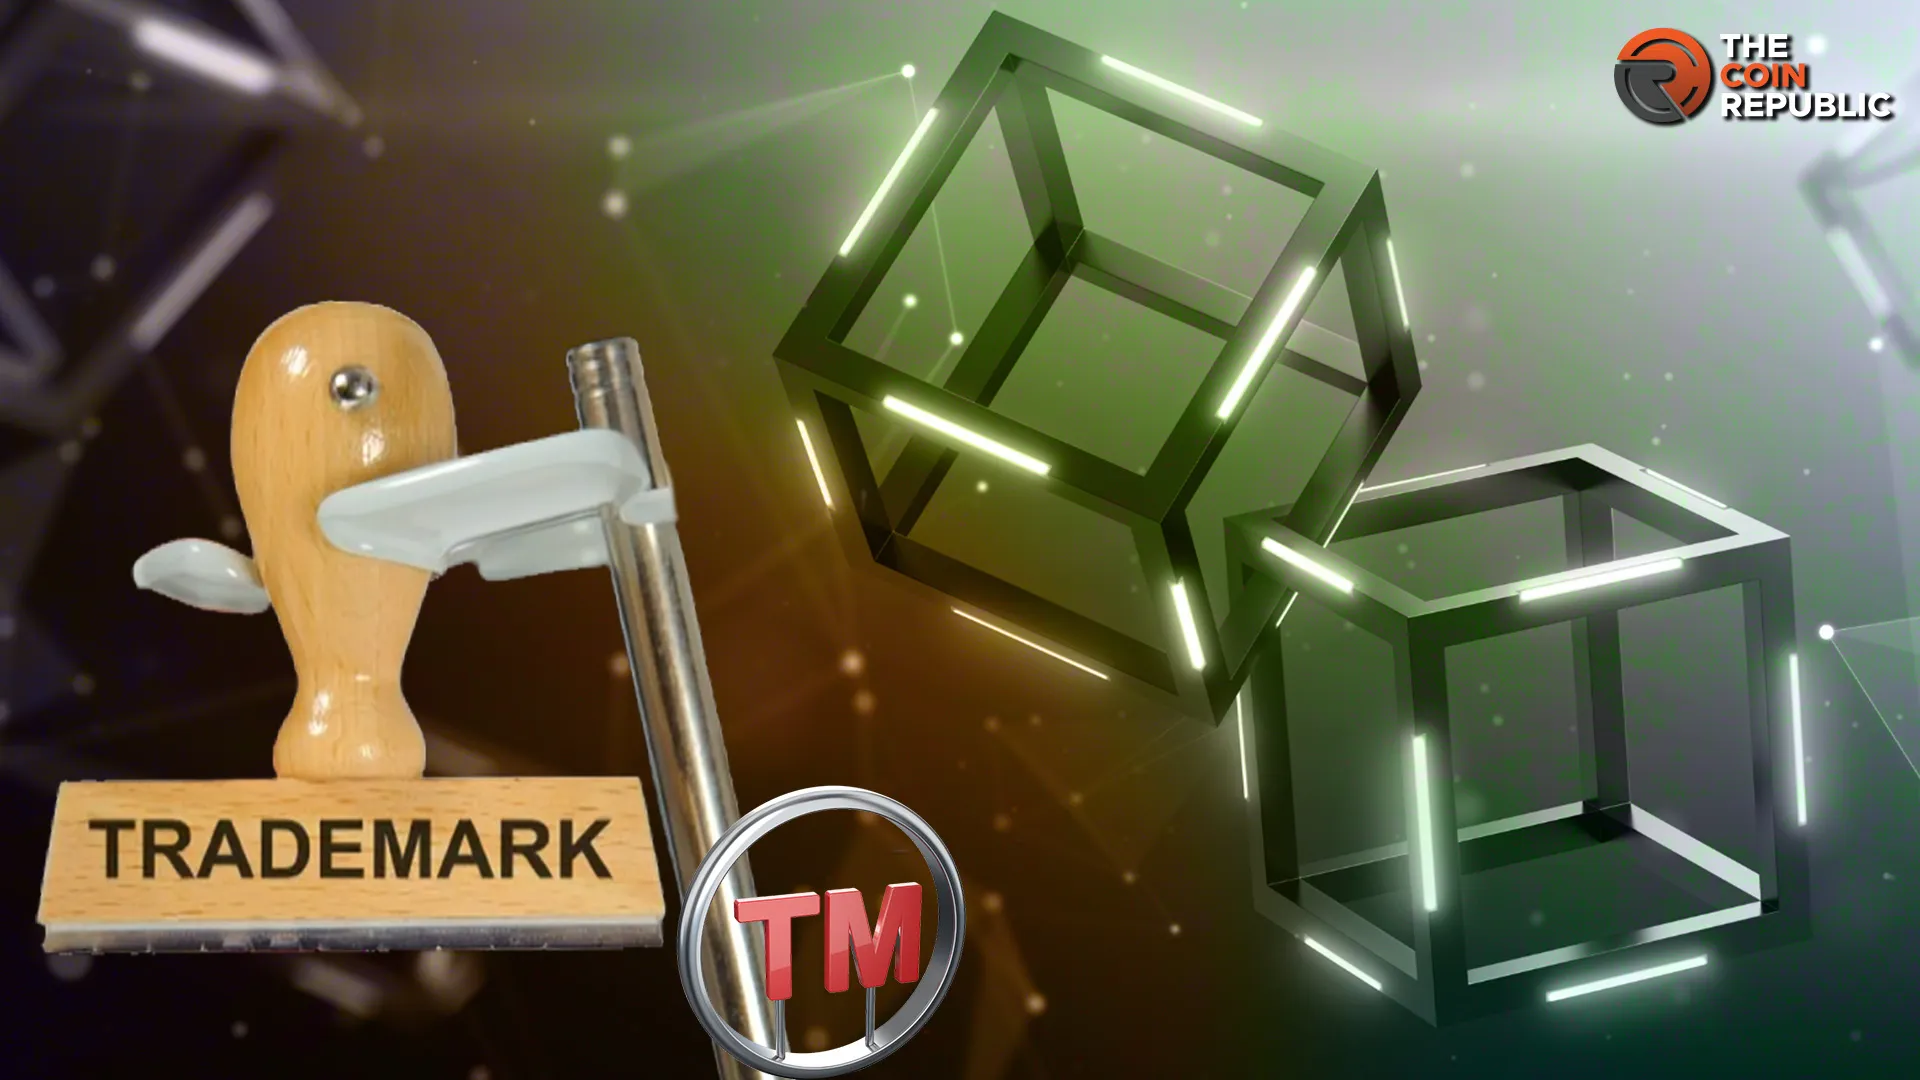 Blockchain & Trademarks: Can Brand Protection Be Revolutionized?